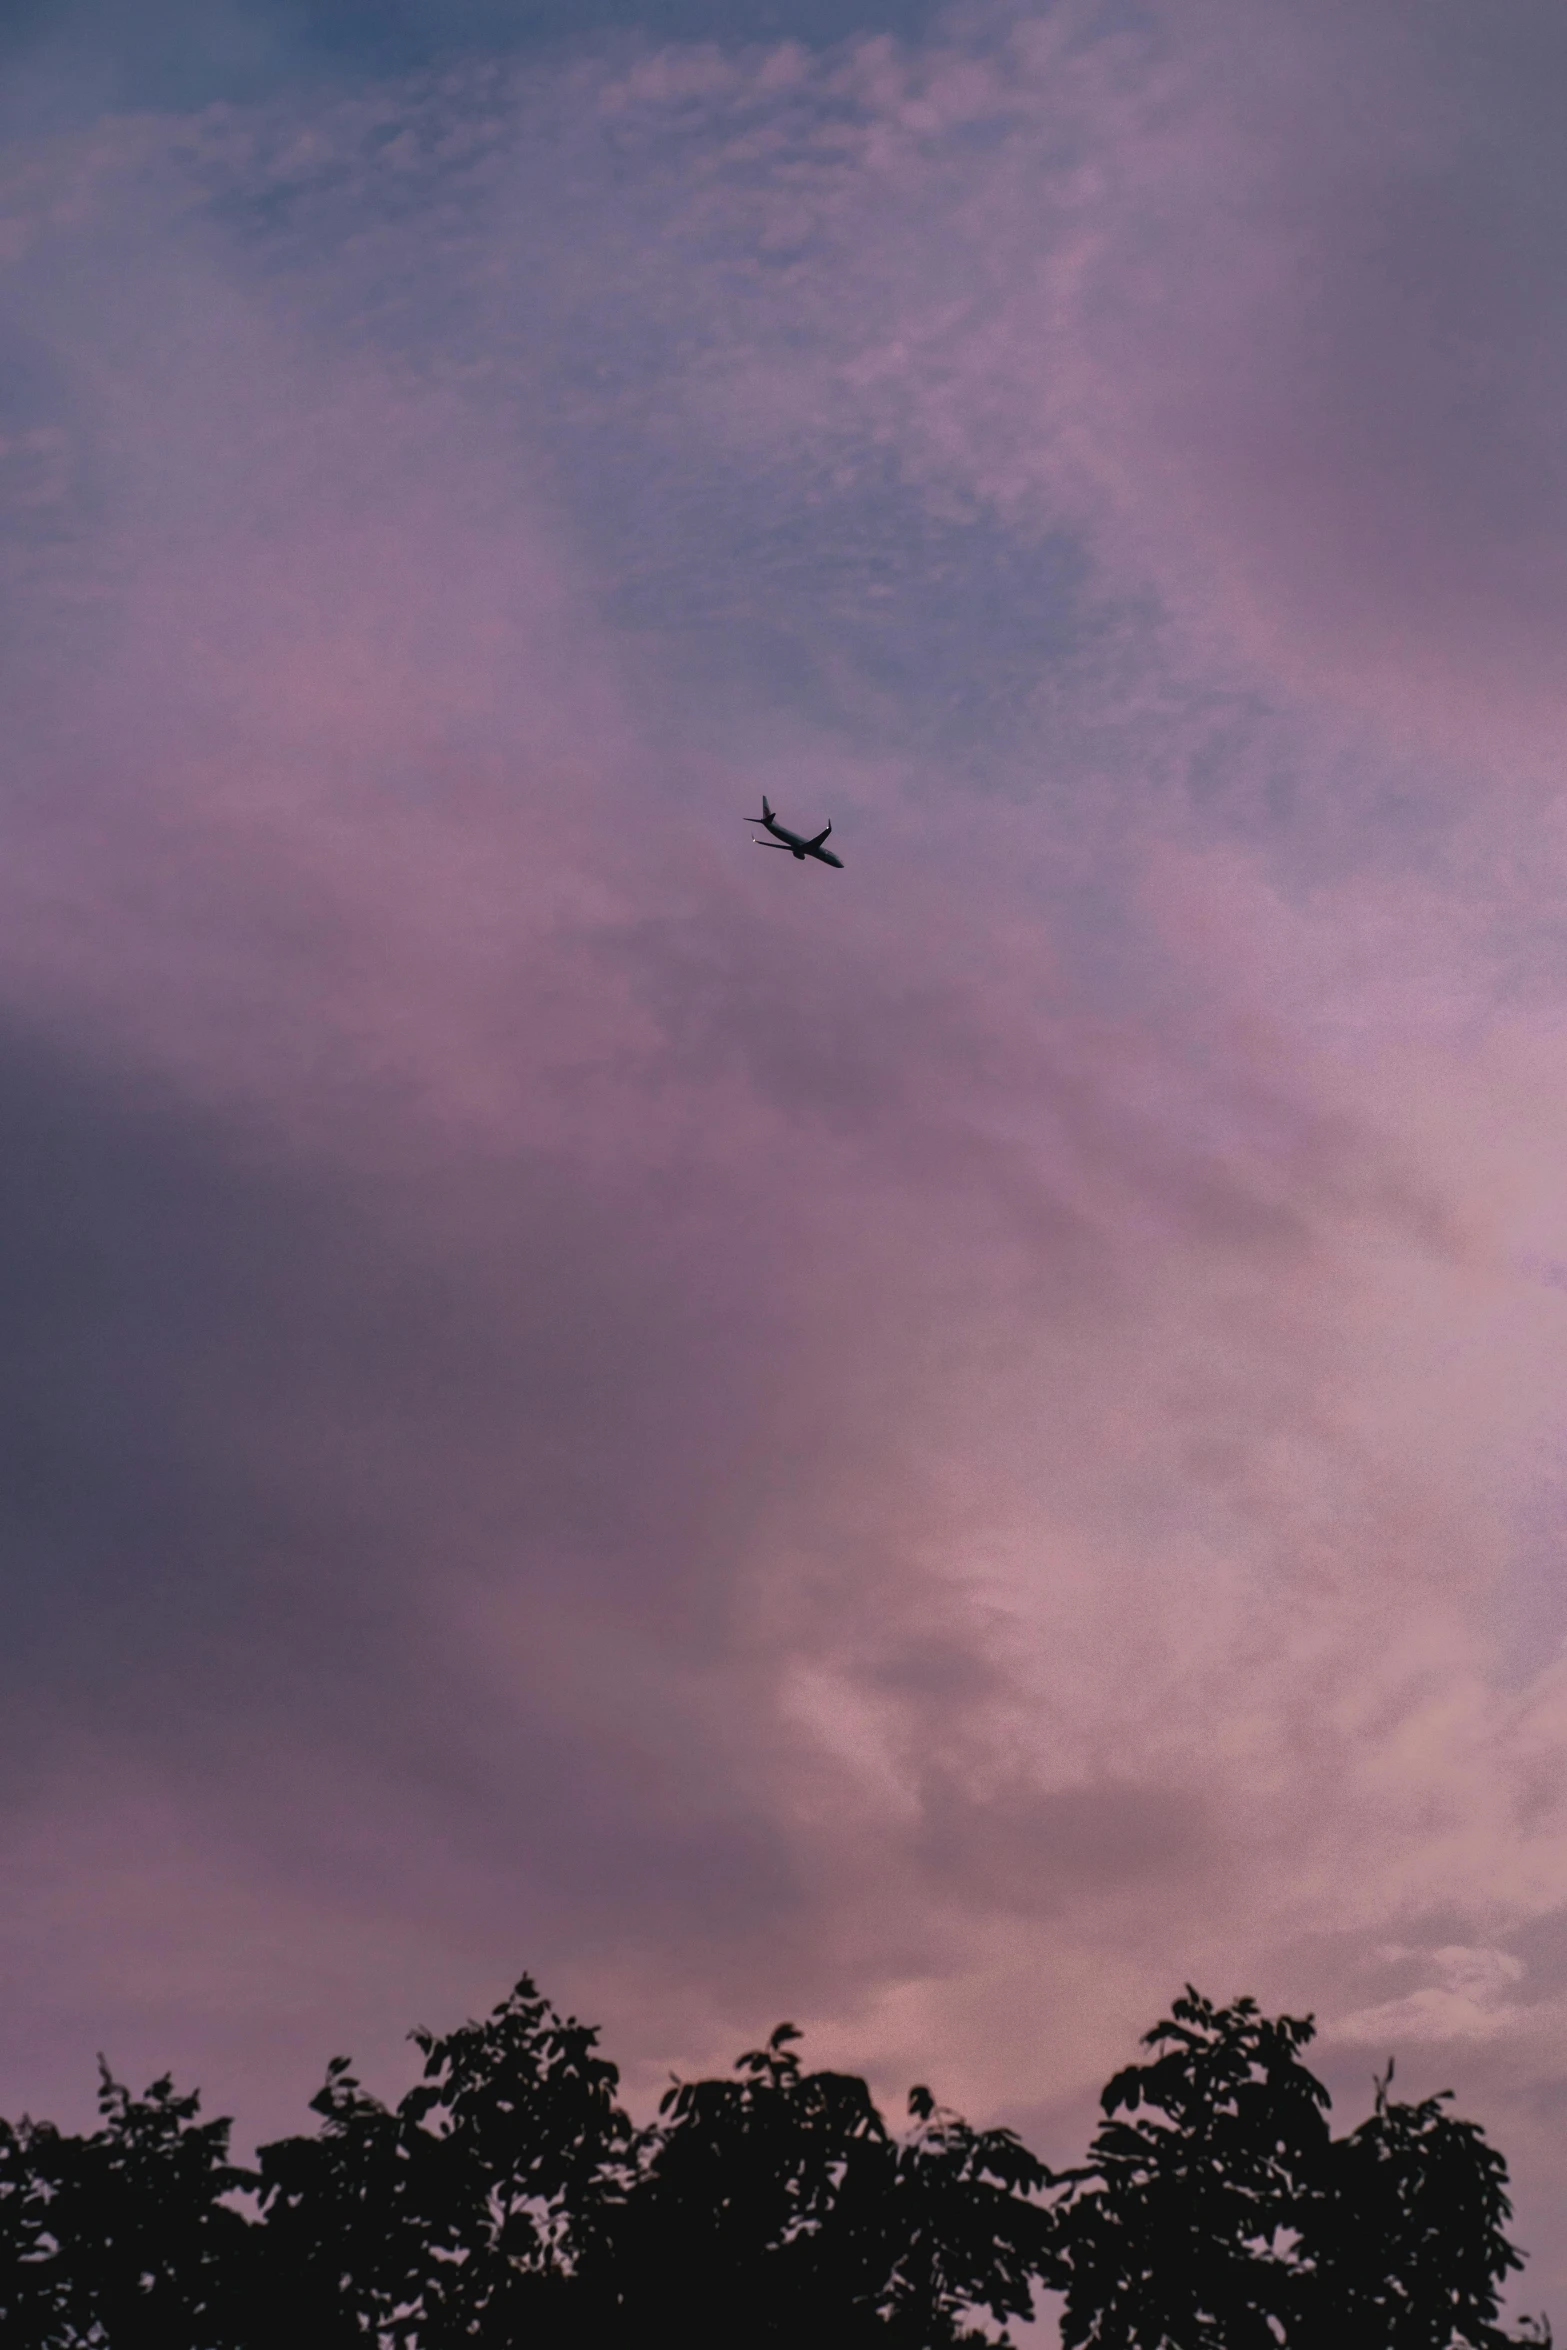 the airplane is flying in an extremely pink sky